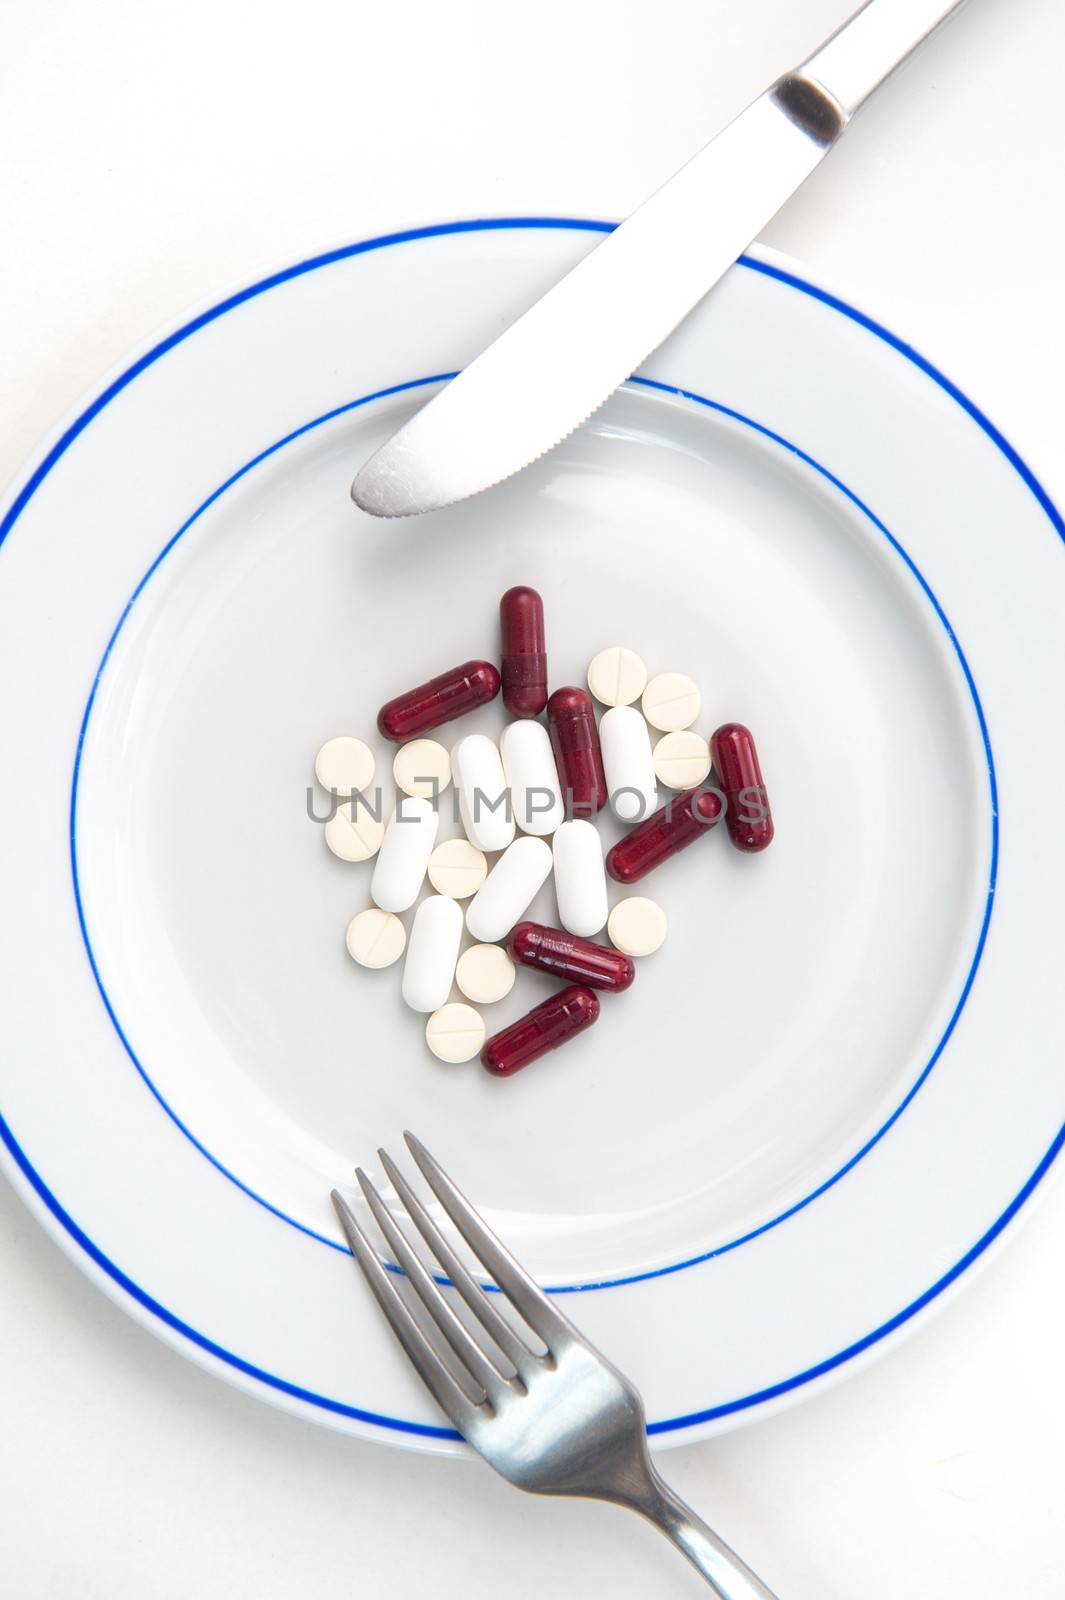 Medical Meal, Tablets and Pills on a plate